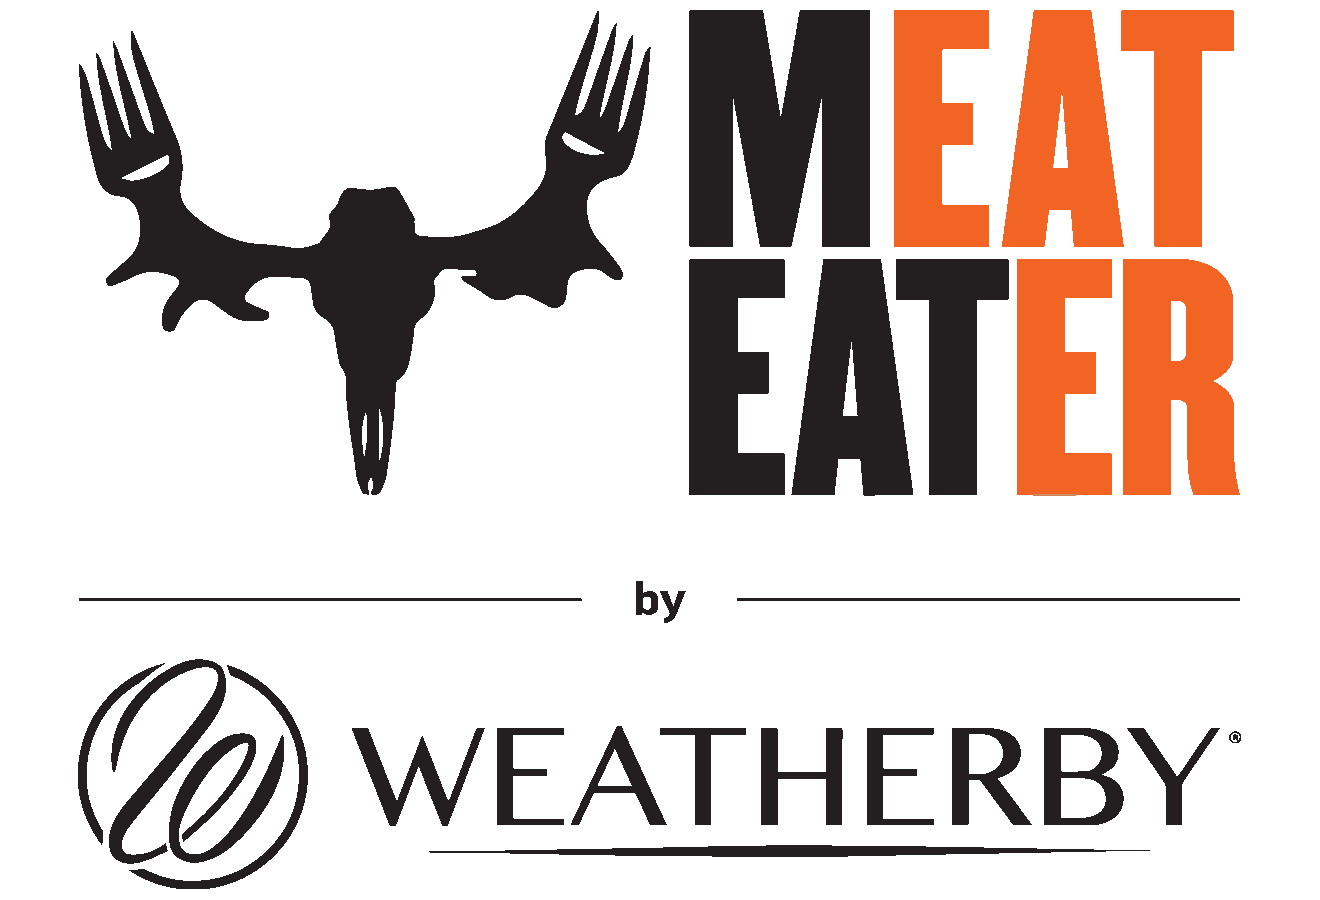 Weatherby MEATEATER Rifle Features